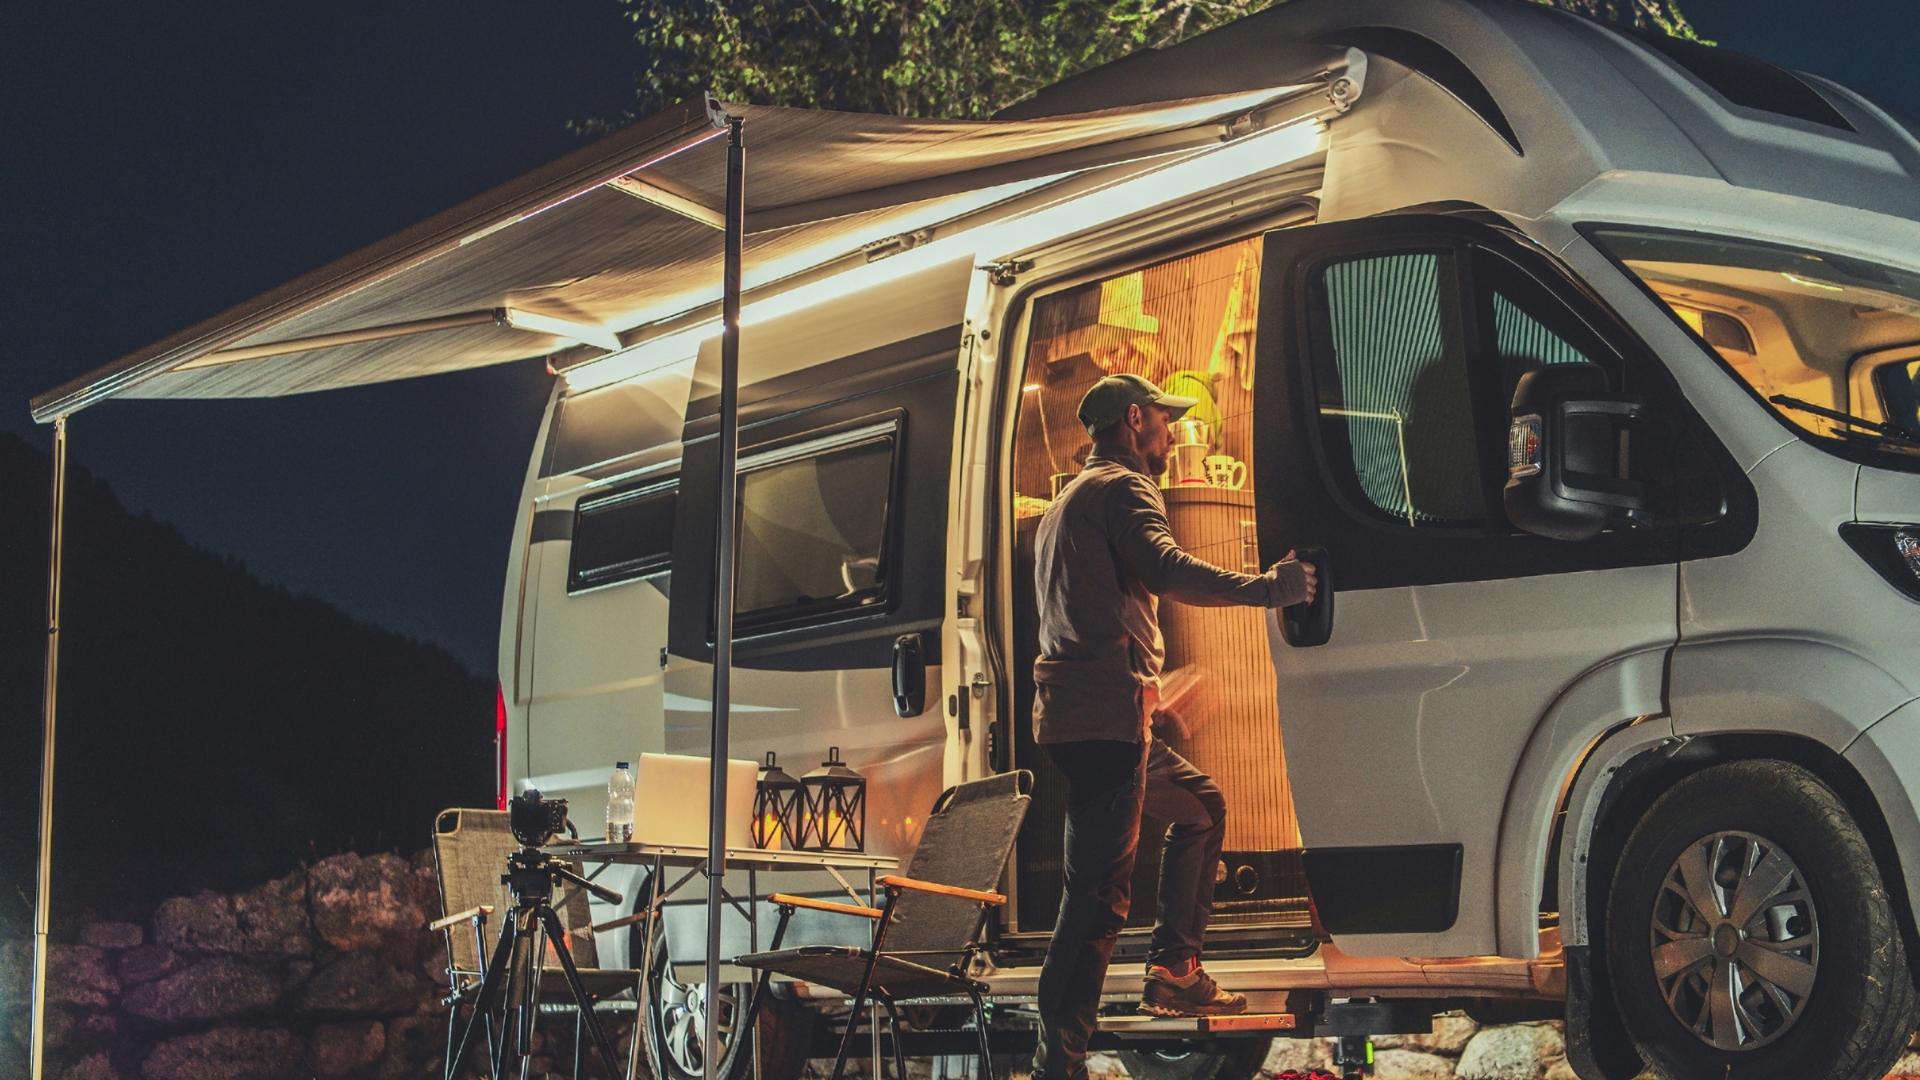 5 Awesome RV Staycation Ideas: Enjoy Your RV & Save on Fuel!